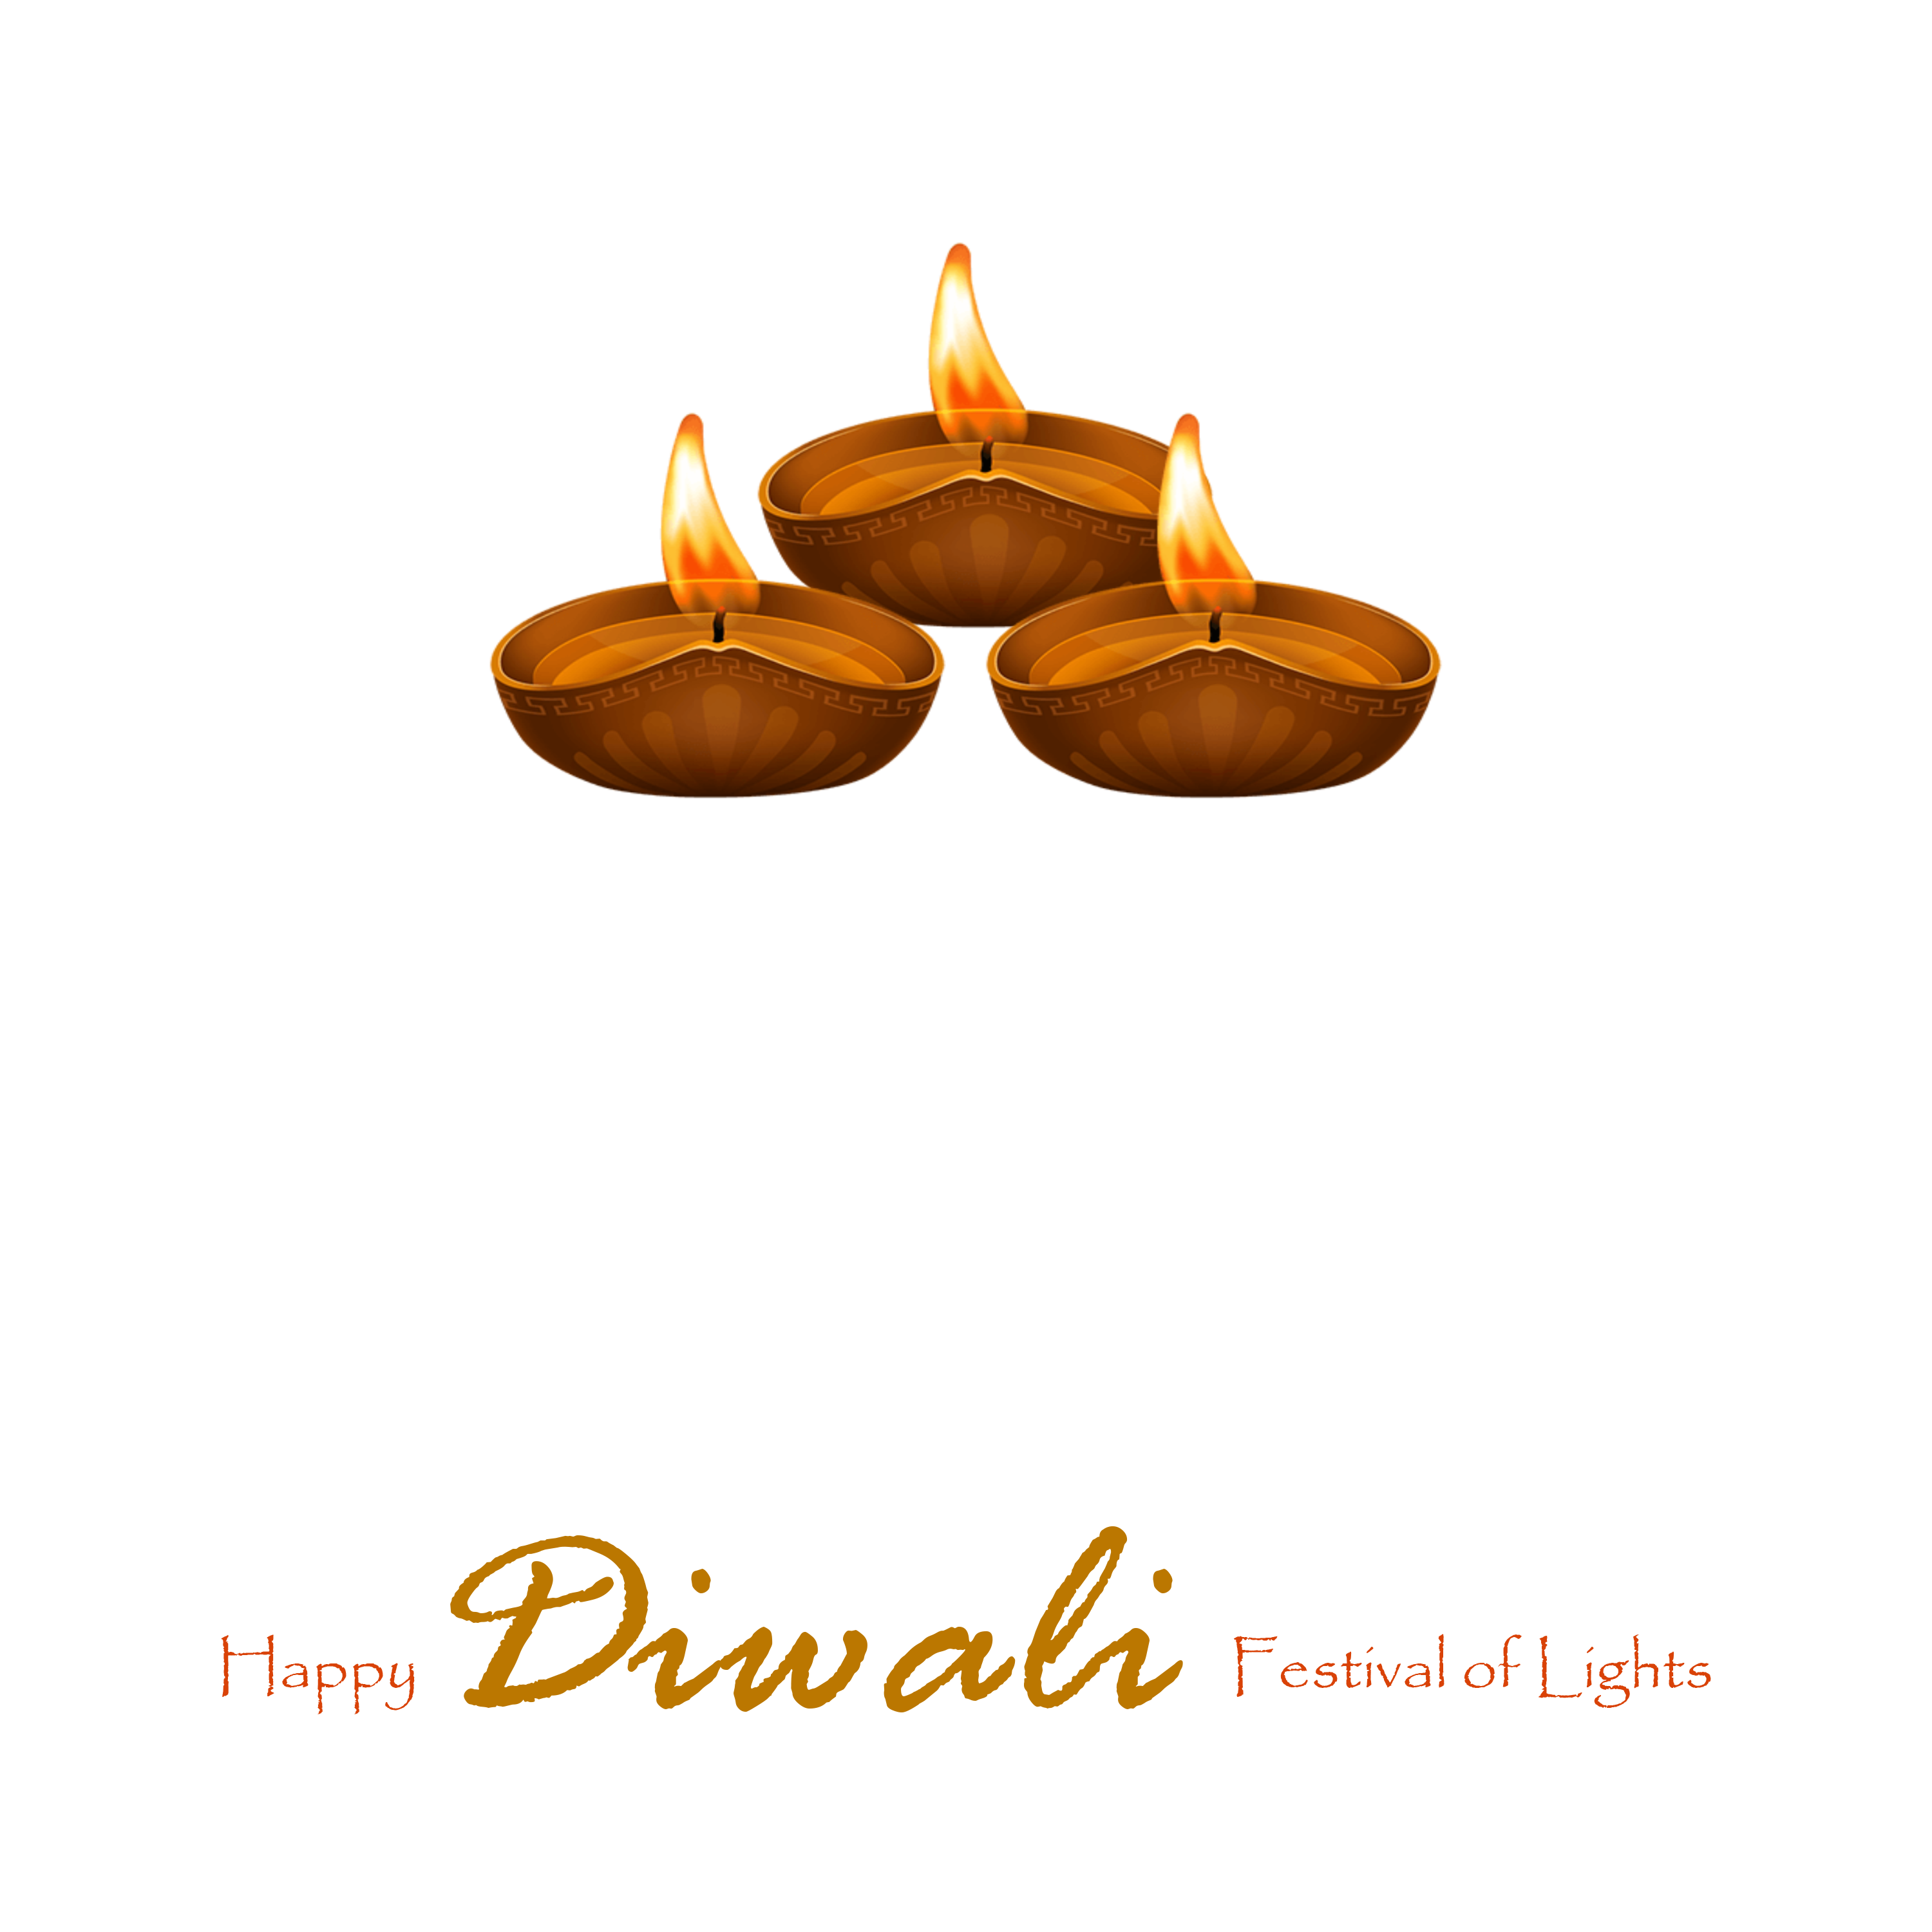 Diwali wishes vector PNG